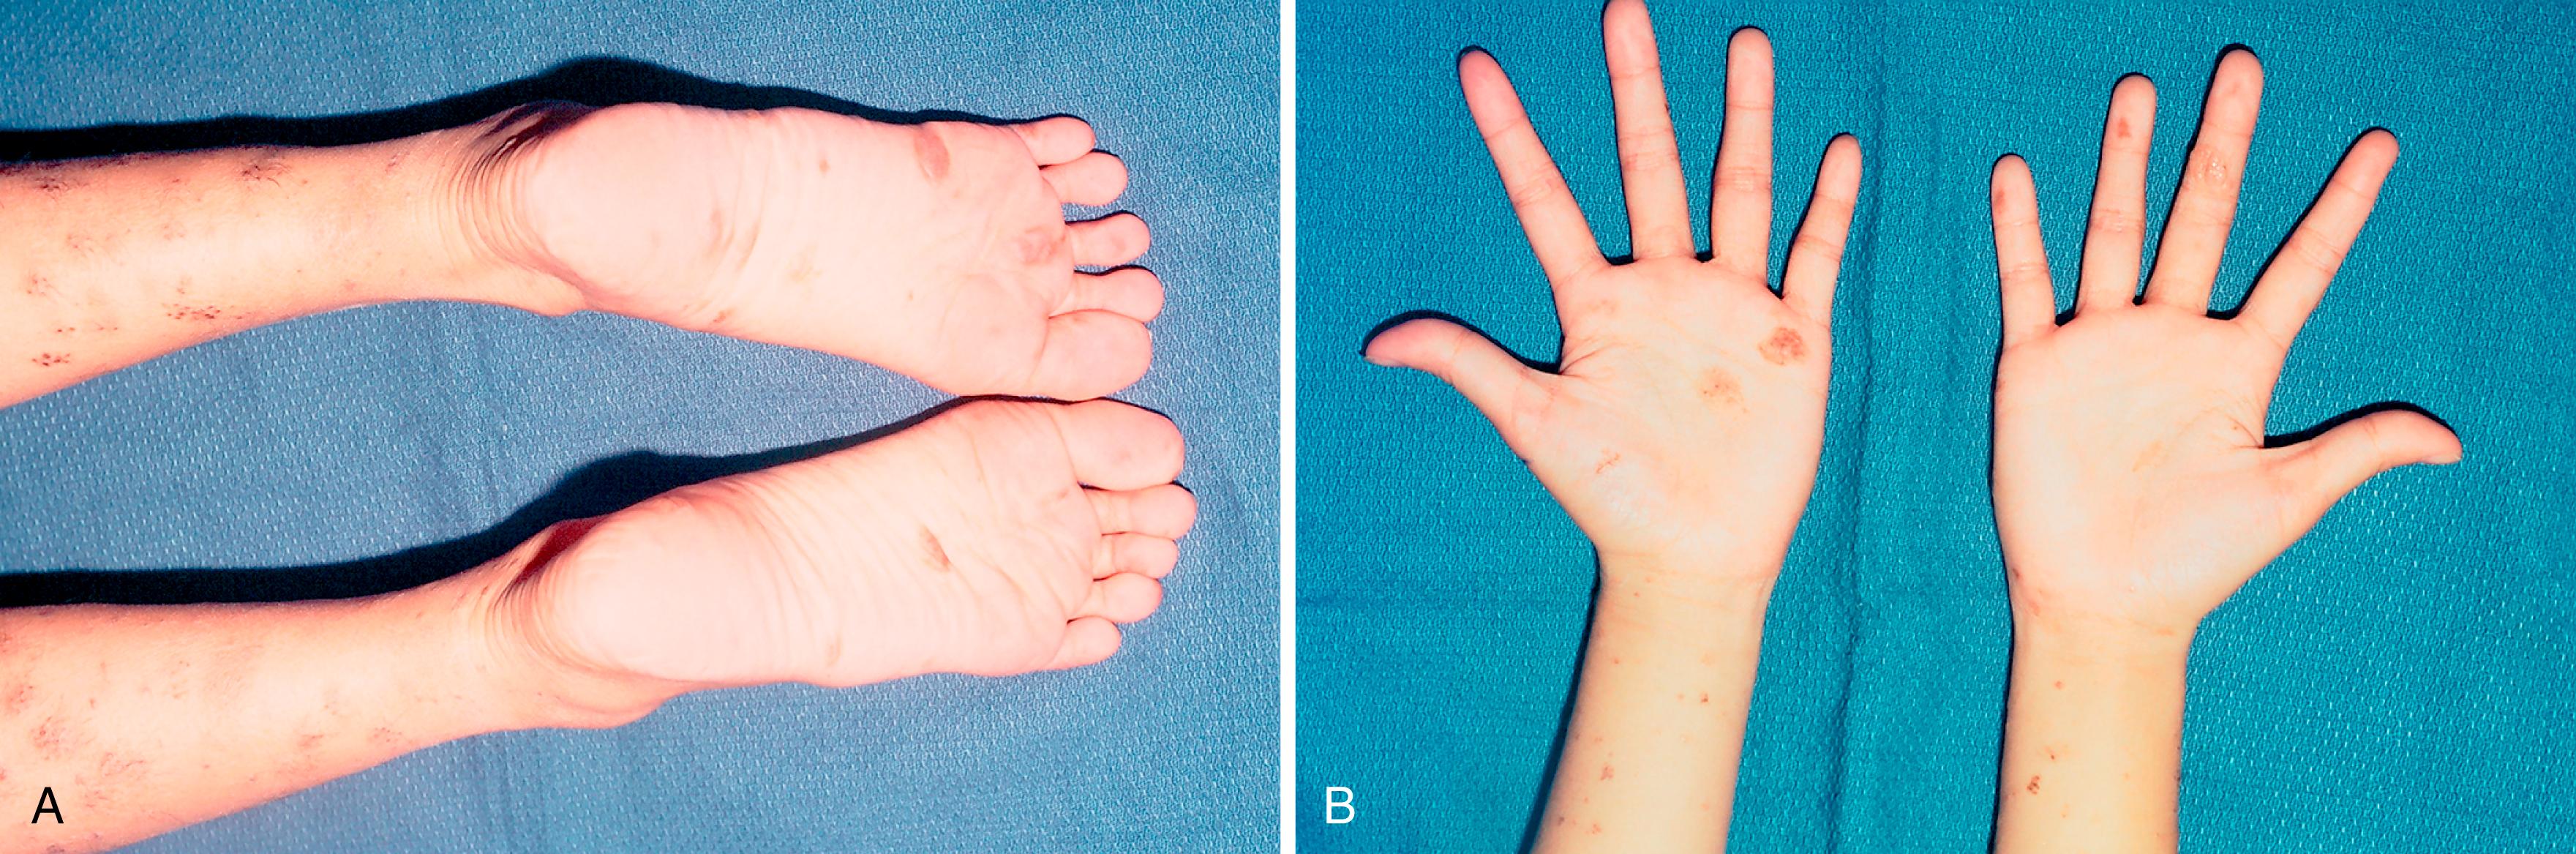 Fig. 58.13, A and B, Child with multiple dysplastic nevi on trunk and upper and lower extremities, including plantar and palmar surfaces (acral nevi).